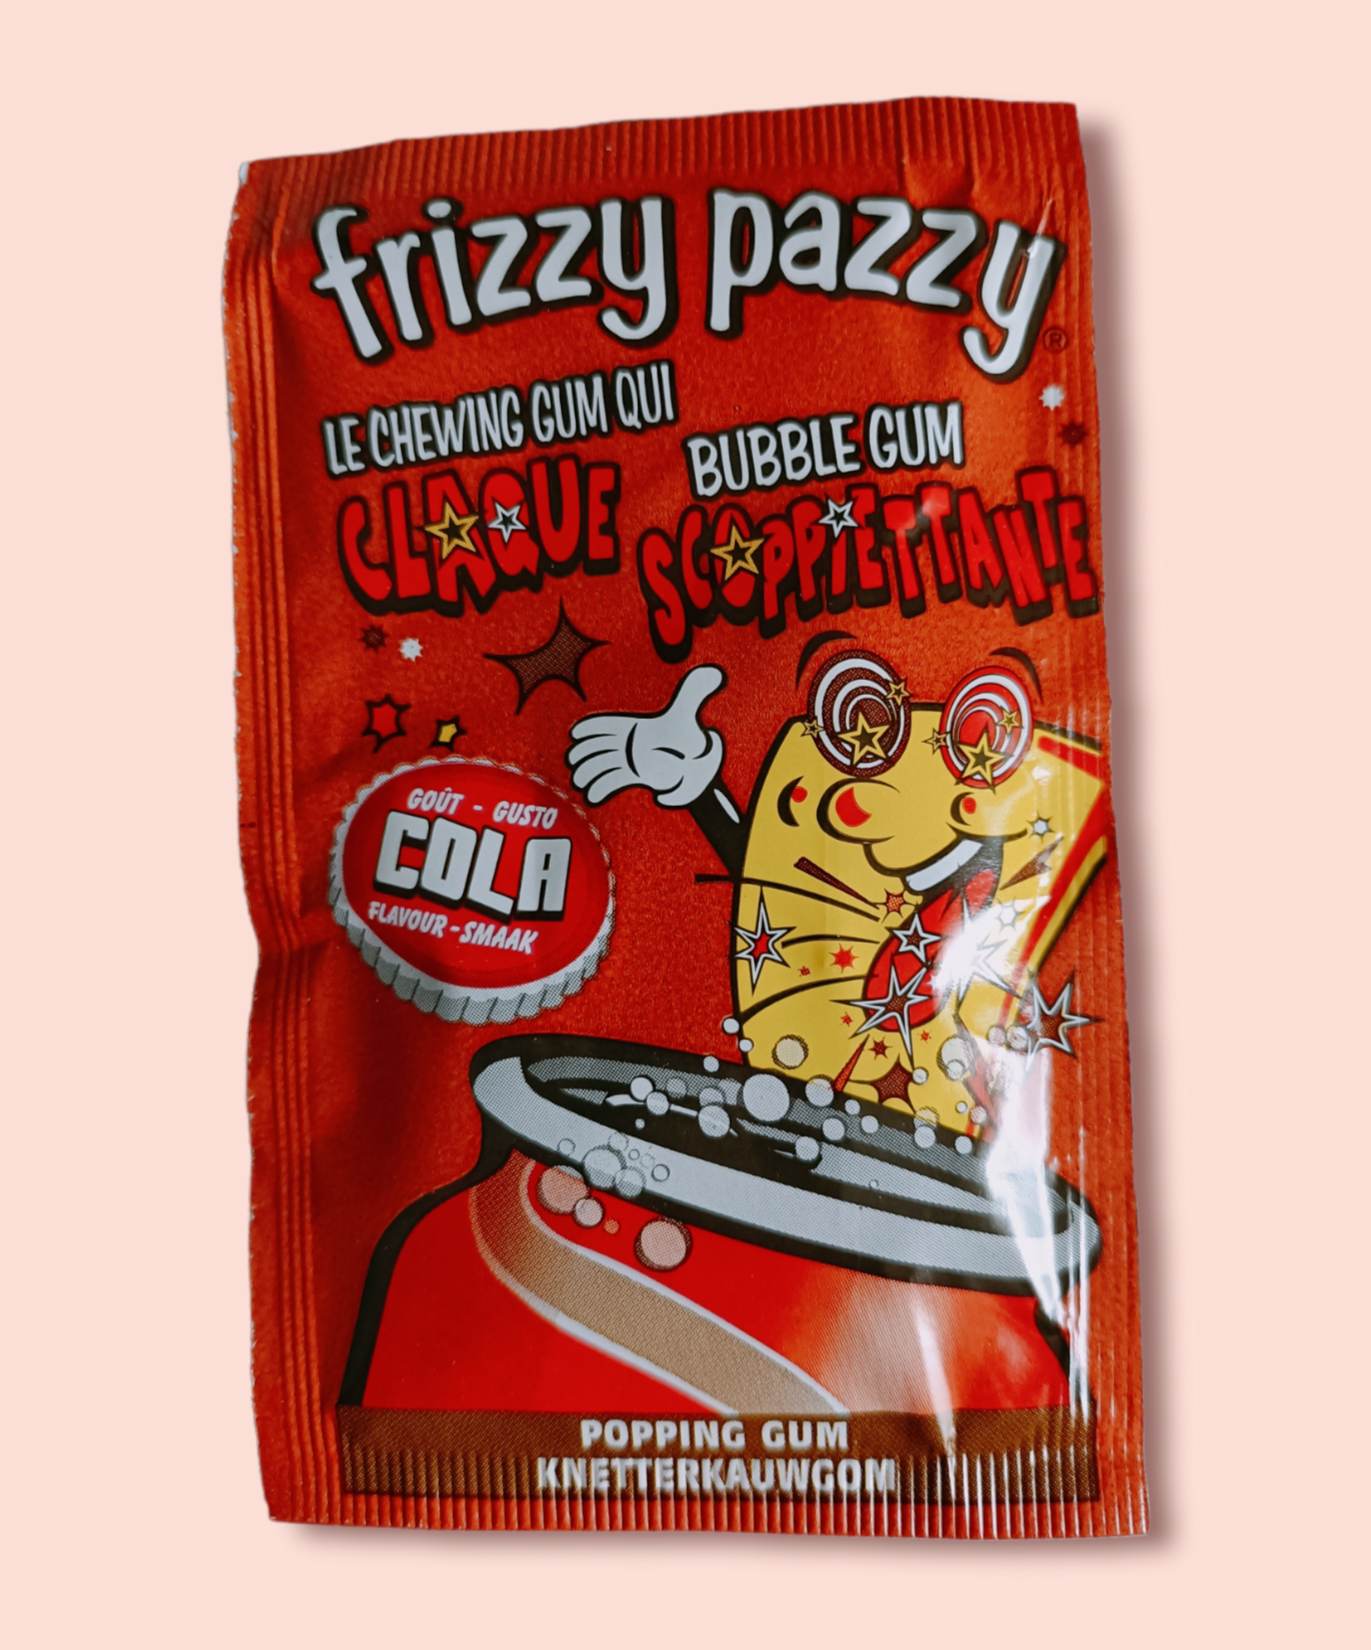 frizzy pazzy cola - Bonbons /Bonbons chewing-gum - la-reserve